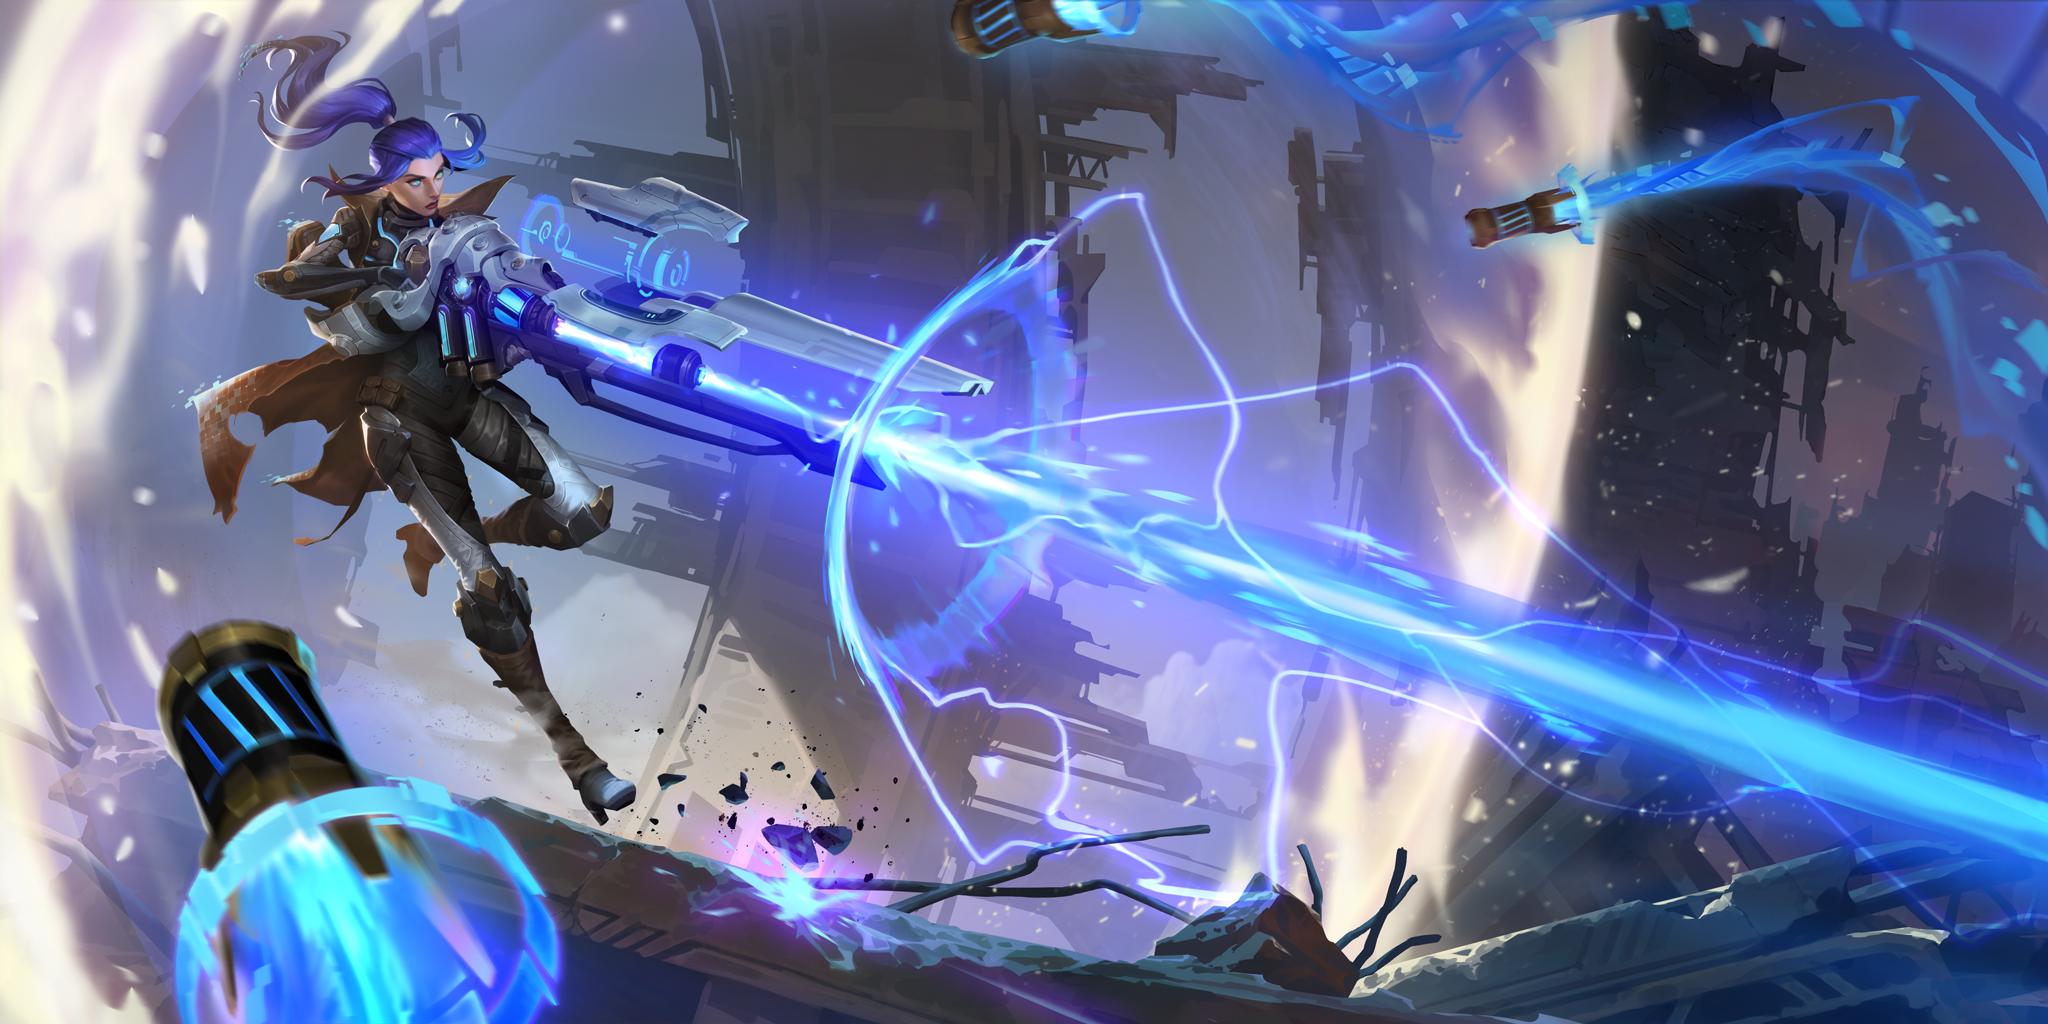 Legends of Runeterra Player Support - Pulsefire Caitlyn firing an energy beam from a huge rifle as missiles come her way.